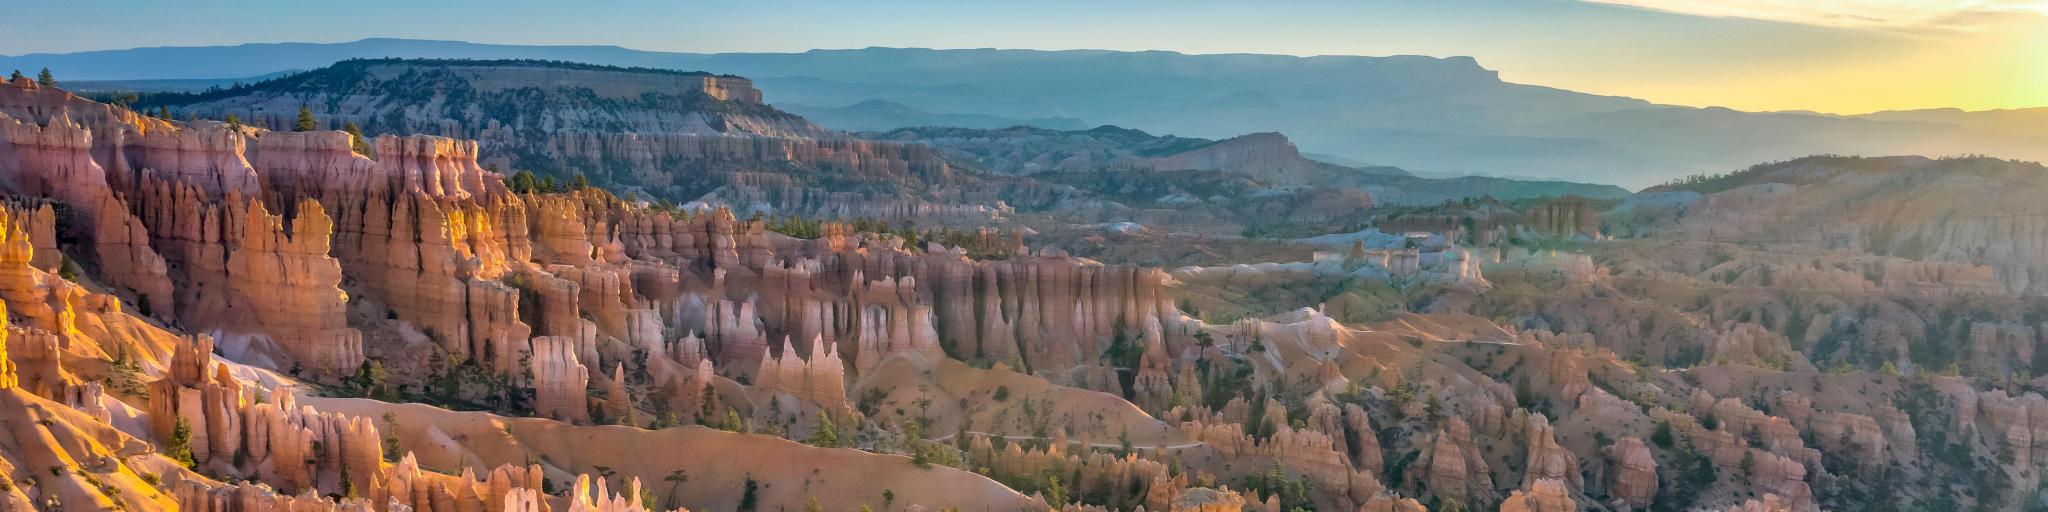 Bryce Canyon National Park, an American national park located in southwestern Utah.